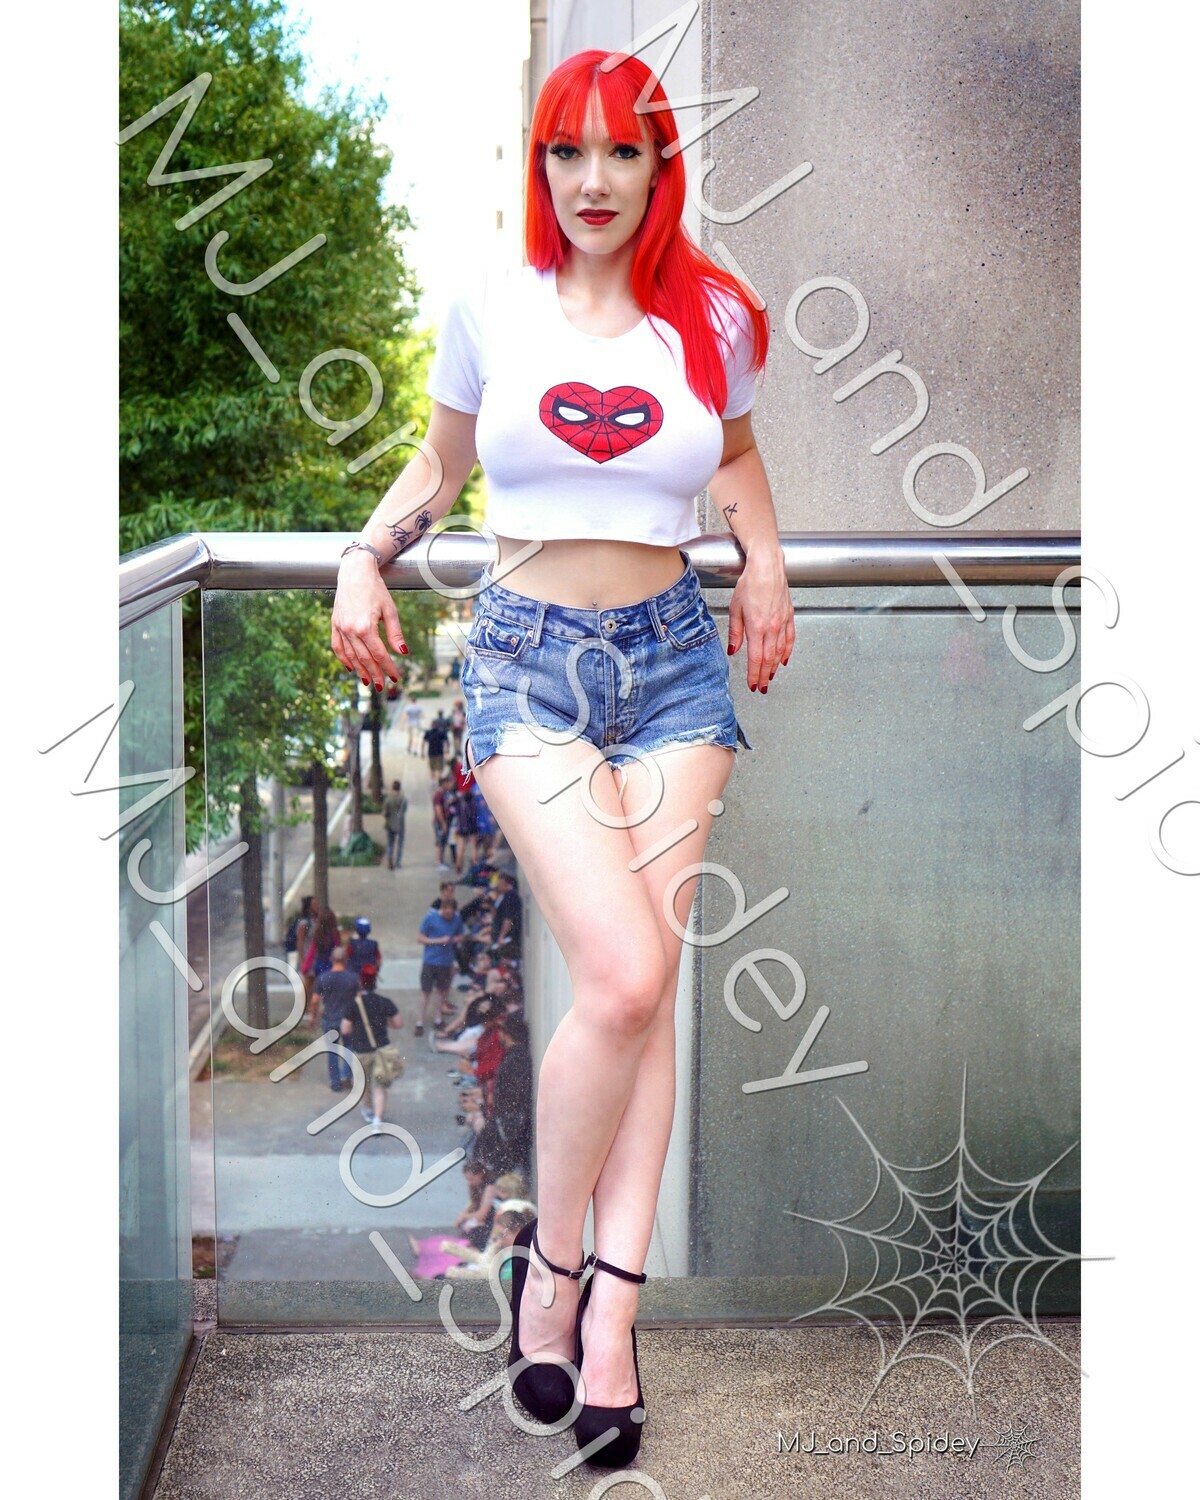 Marvel - Spider-Man - Mary Jane Watson - Classic No. 5 - 8x10 Cosplay Print (@MJ_and_Spidey, MJ and Spidey, Comics)